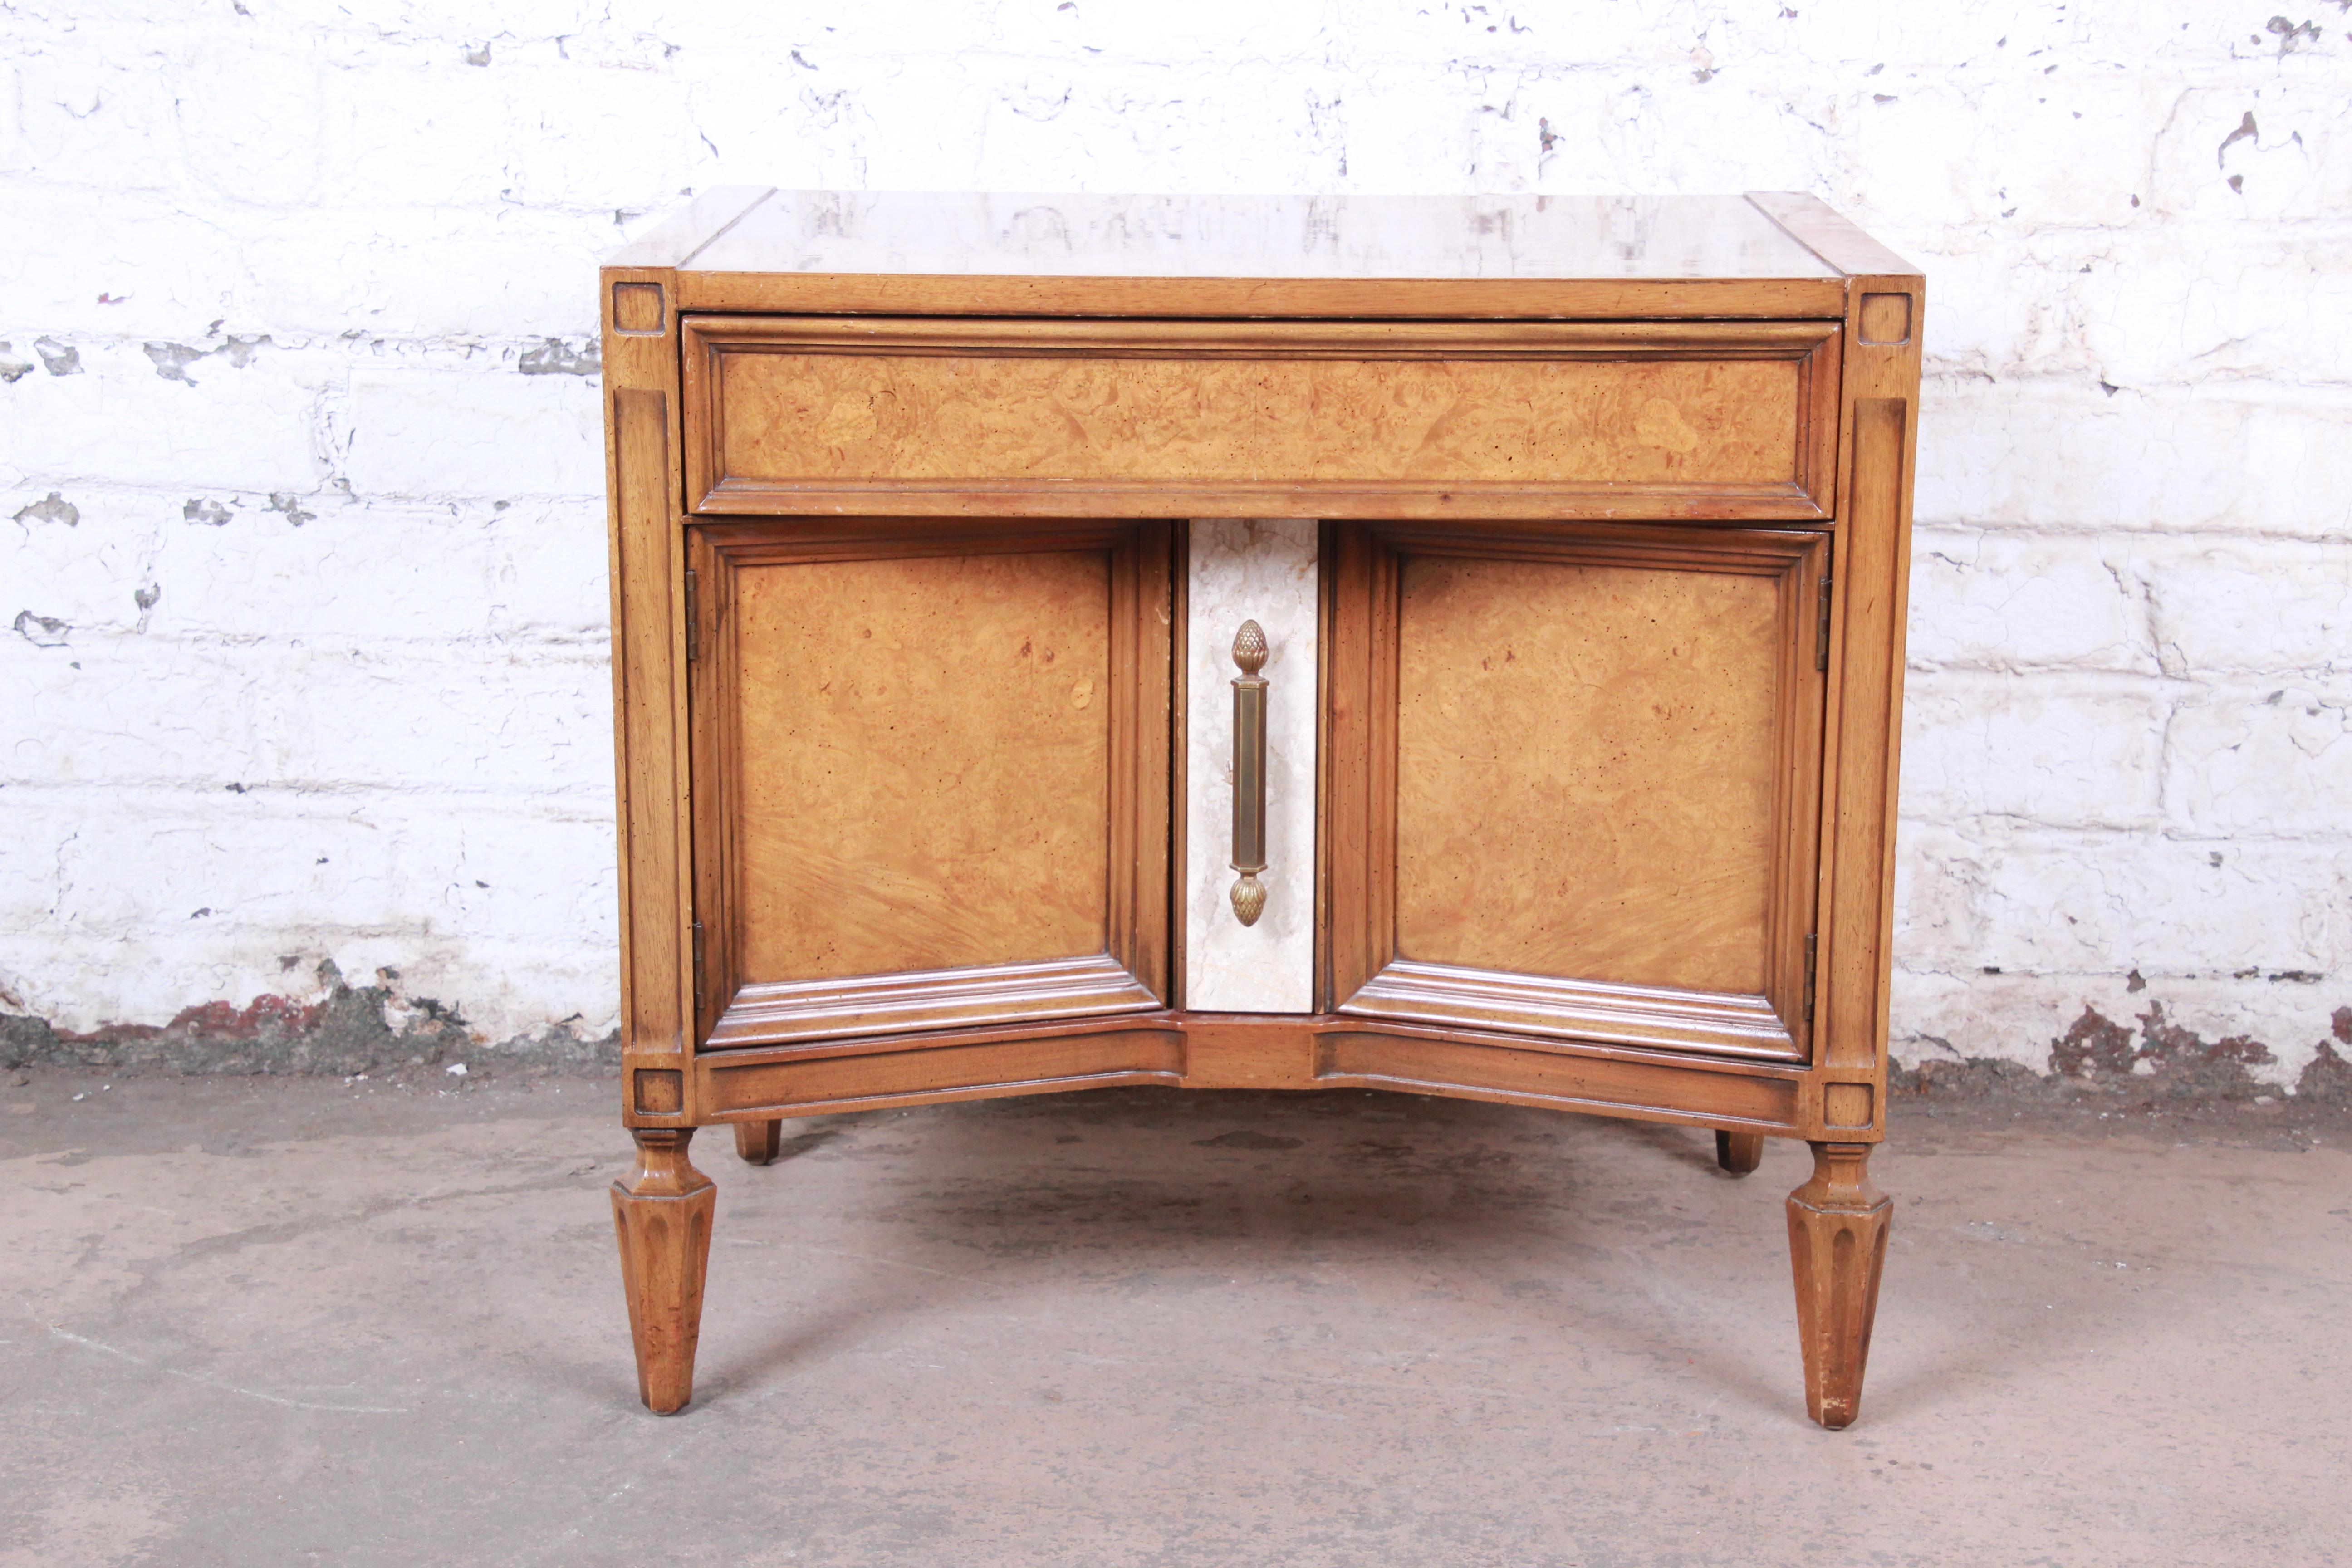 A gorgeous Mid-Century Modern Hollywood Regency nightstand or end table from the 